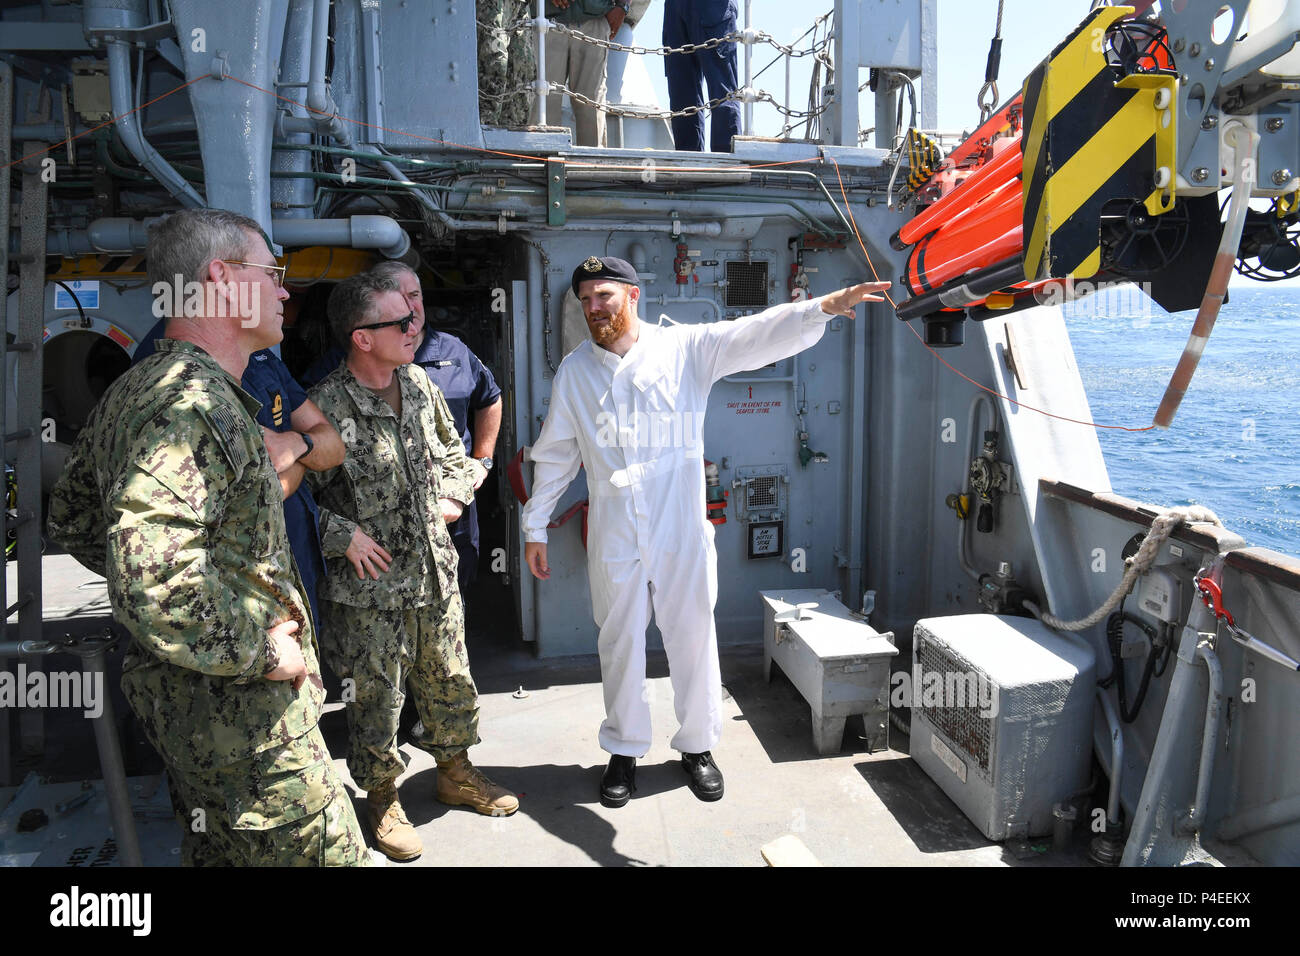 180617-N-TB177-0085 ARABIAN GULF (June 17, 2018) Lt. Tom Hasting, right, shows a Sea Fox inspection round to Vice Adm. Scott Stearney, commander of U.S. Naval Forces Central Command, U.S. 5th Fleet, Combined Maritime Forces, left, aboard HMS Middleton during Mine Countermeasures Exercise (MCMEX) 18-2. The bilateral exercise enhances cooperation, mutual MCM capabilities and interoperability between the U.S. and U.K., demonstrating the shared commitment of ensuring unfettered operations of naval and support vessels, as well as commercial shipping movements, throughout the maritime domain. (U.S.  Stock Photo